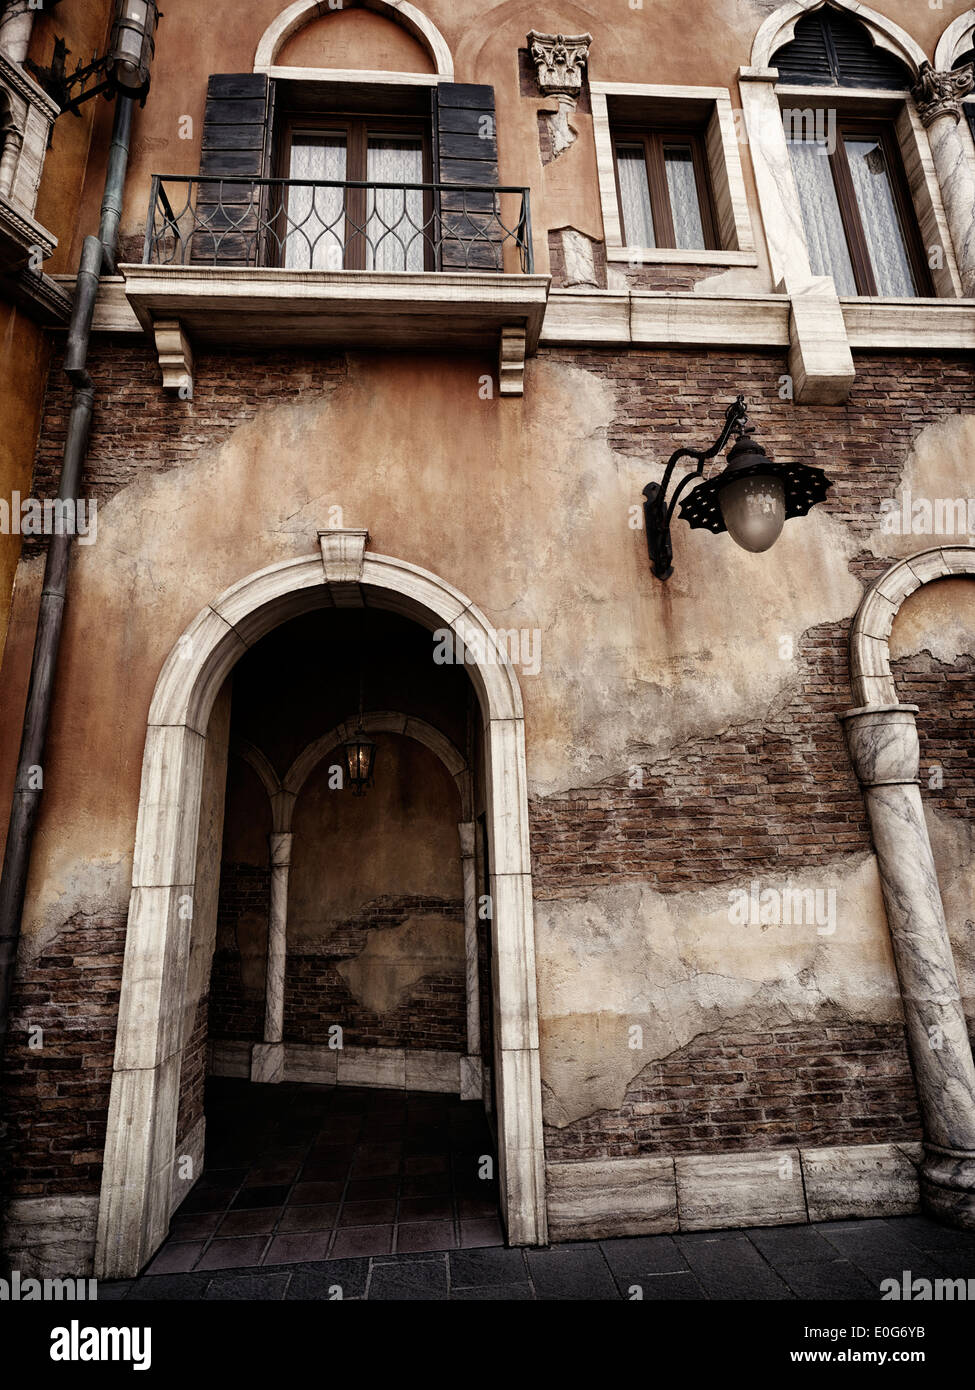 Archway passage in an old rustic building in Venetian gothic architectural style Stock Photo